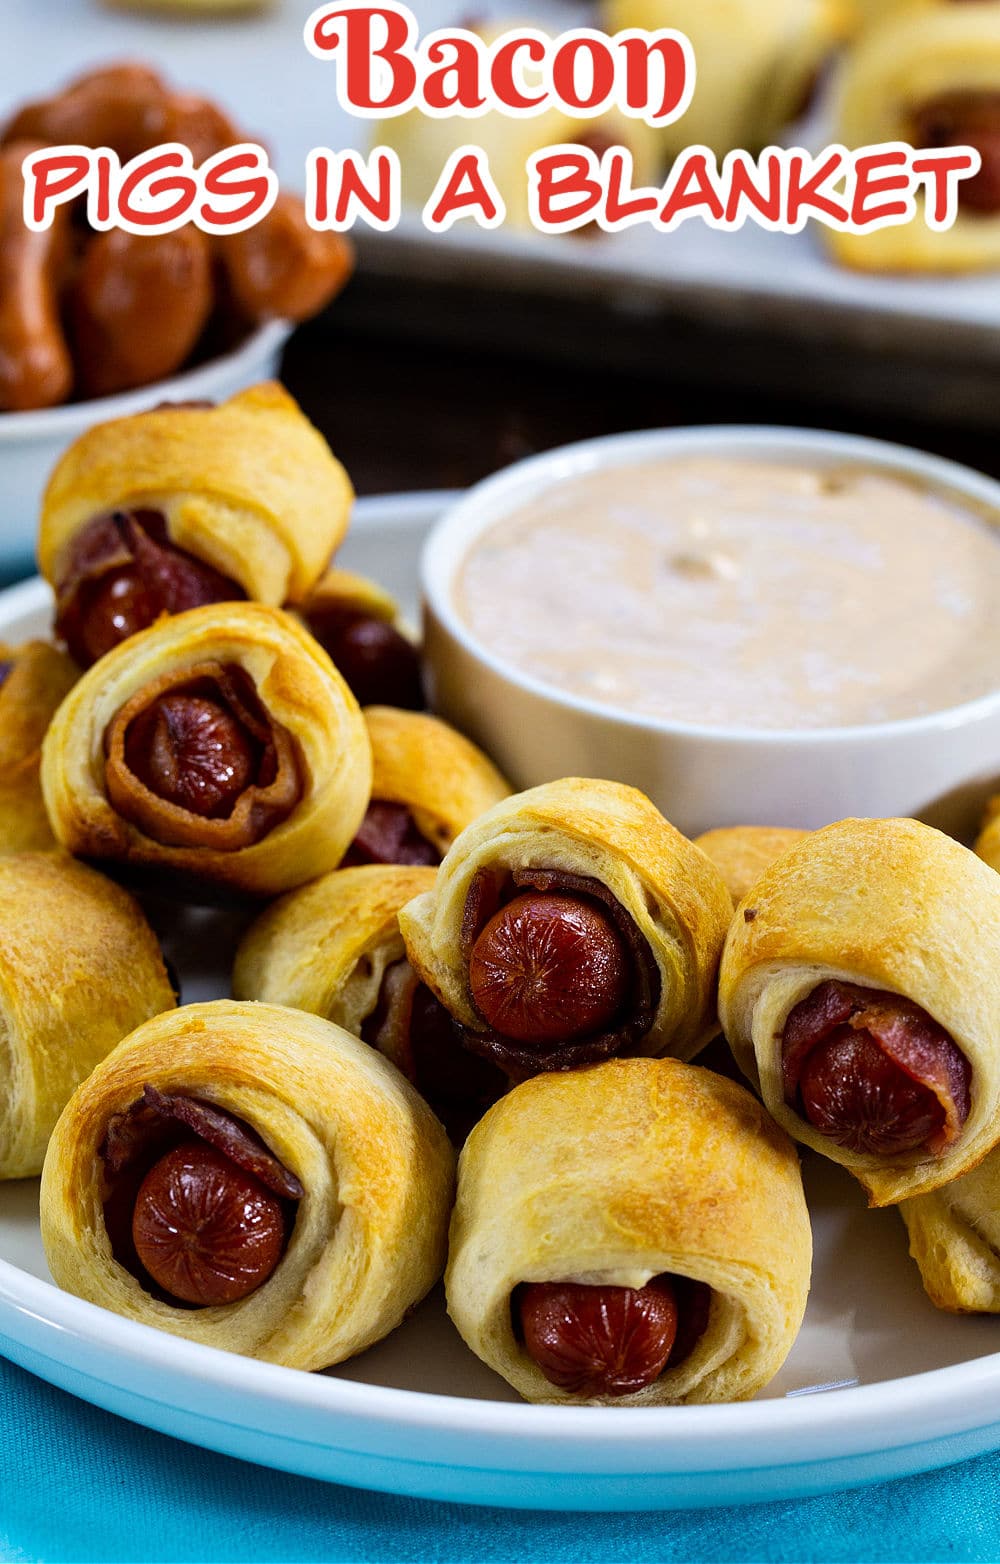 Bacon Pigs in a Blanket on a plate with bowl of dipping sauce.